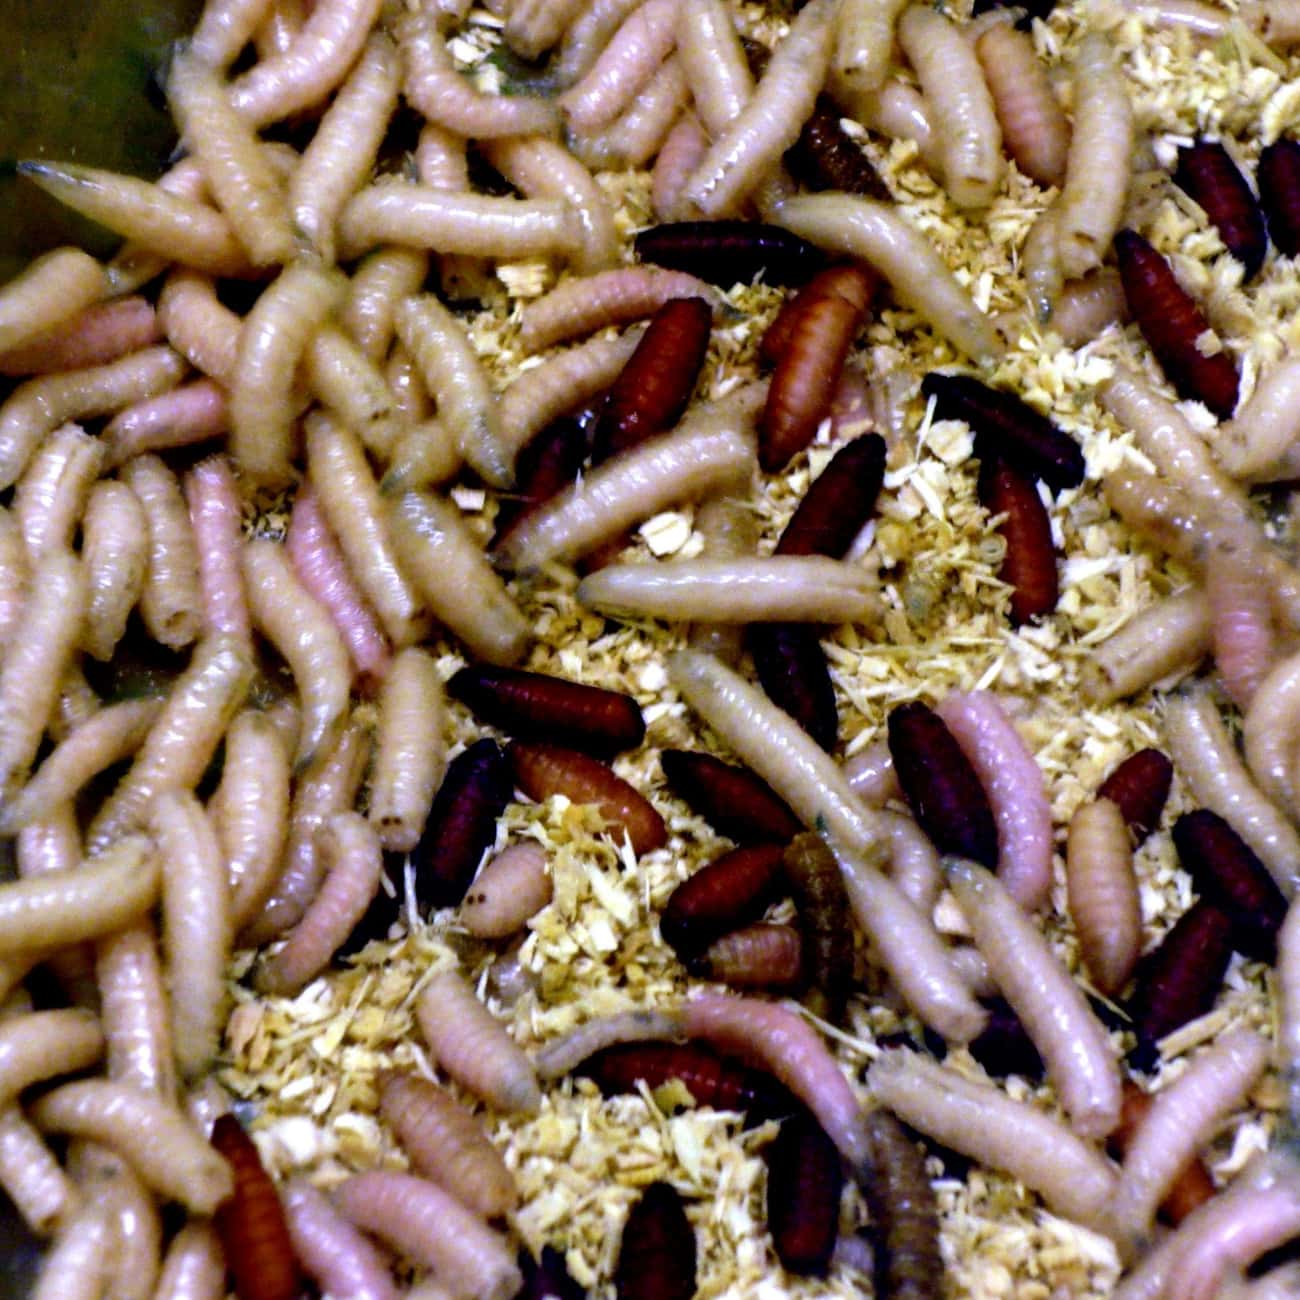 12 Common Bugs You Didn't Know You Were Eating